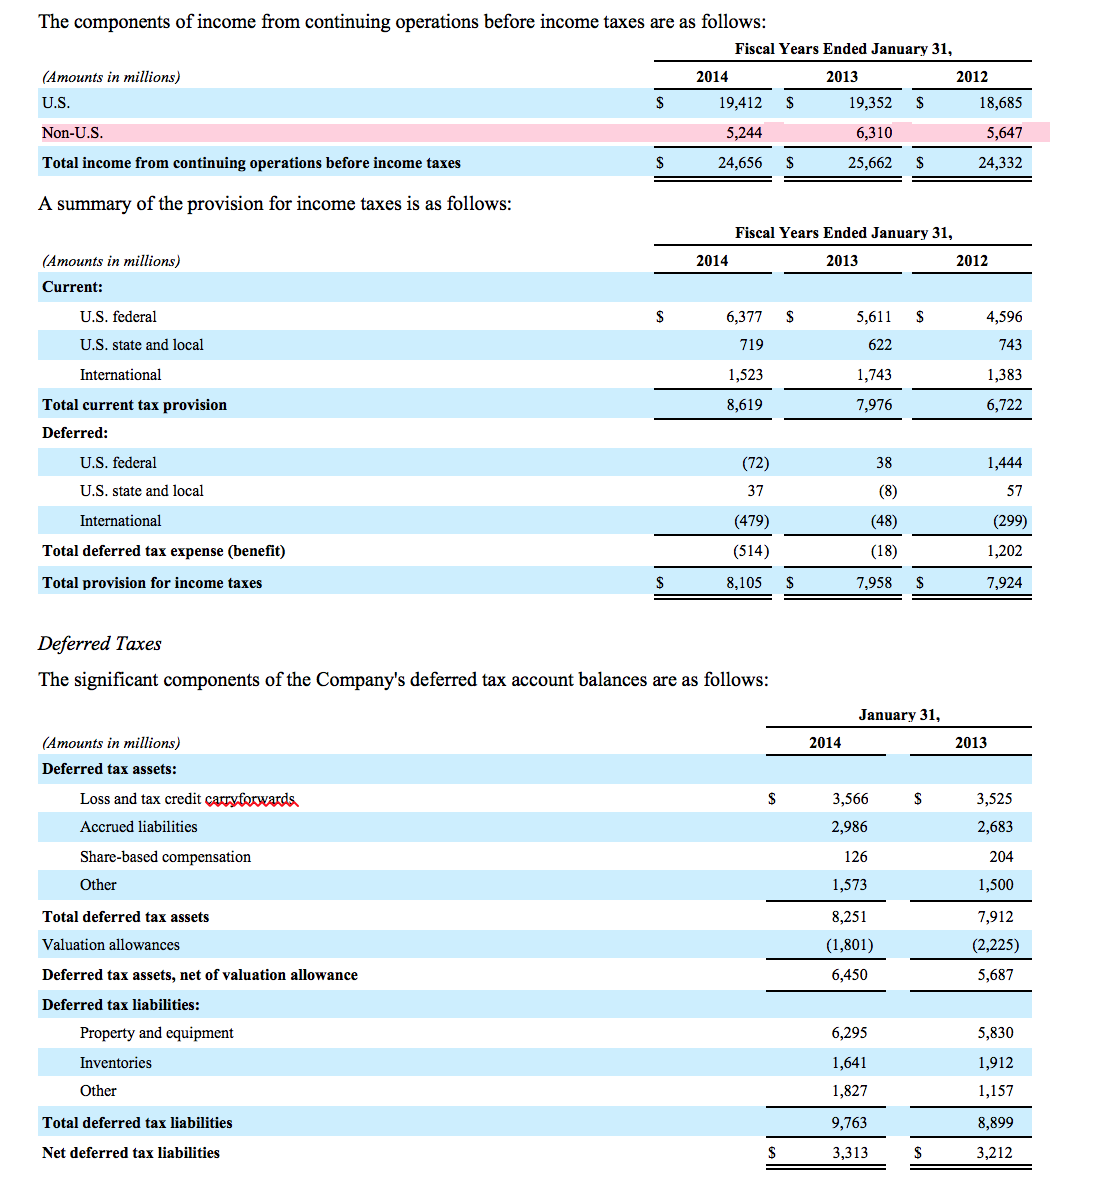 The financial statement of WalMart Stores, Inc.